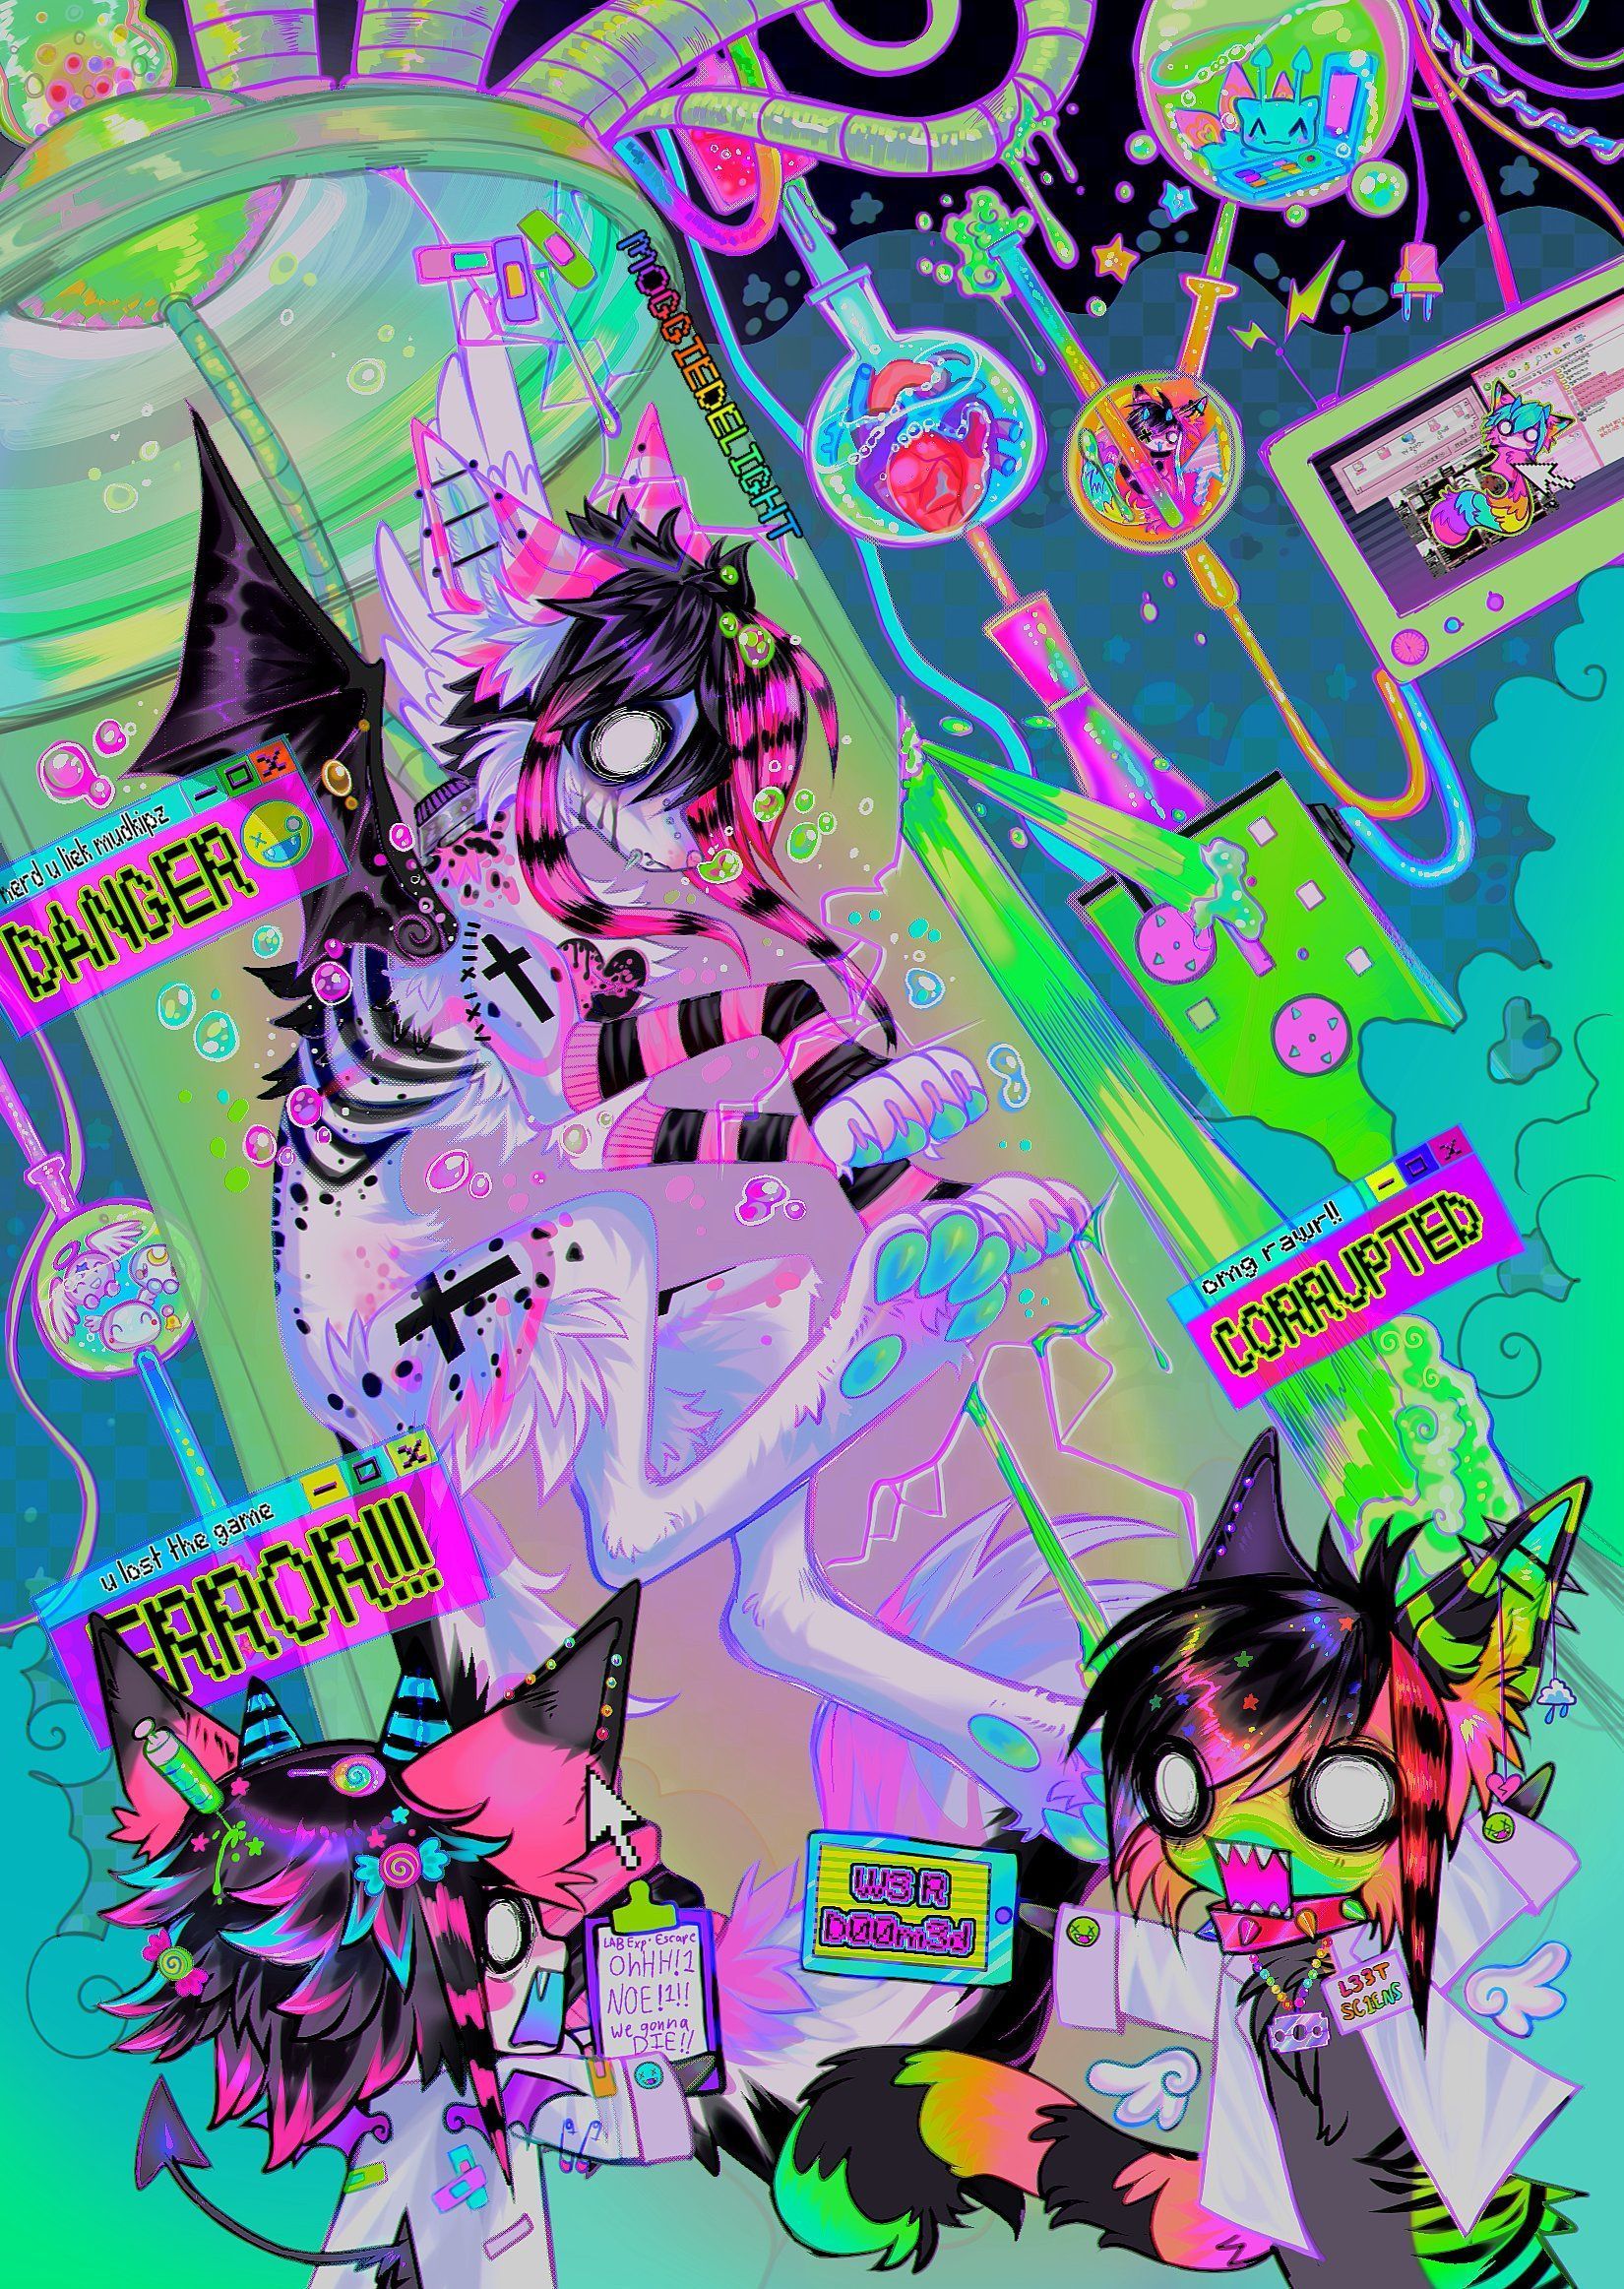 A digital art piece of two chibi characters, one with pink hair and one with green, standing in a neon green room with a lot of neon signs and objects. - Scenecore